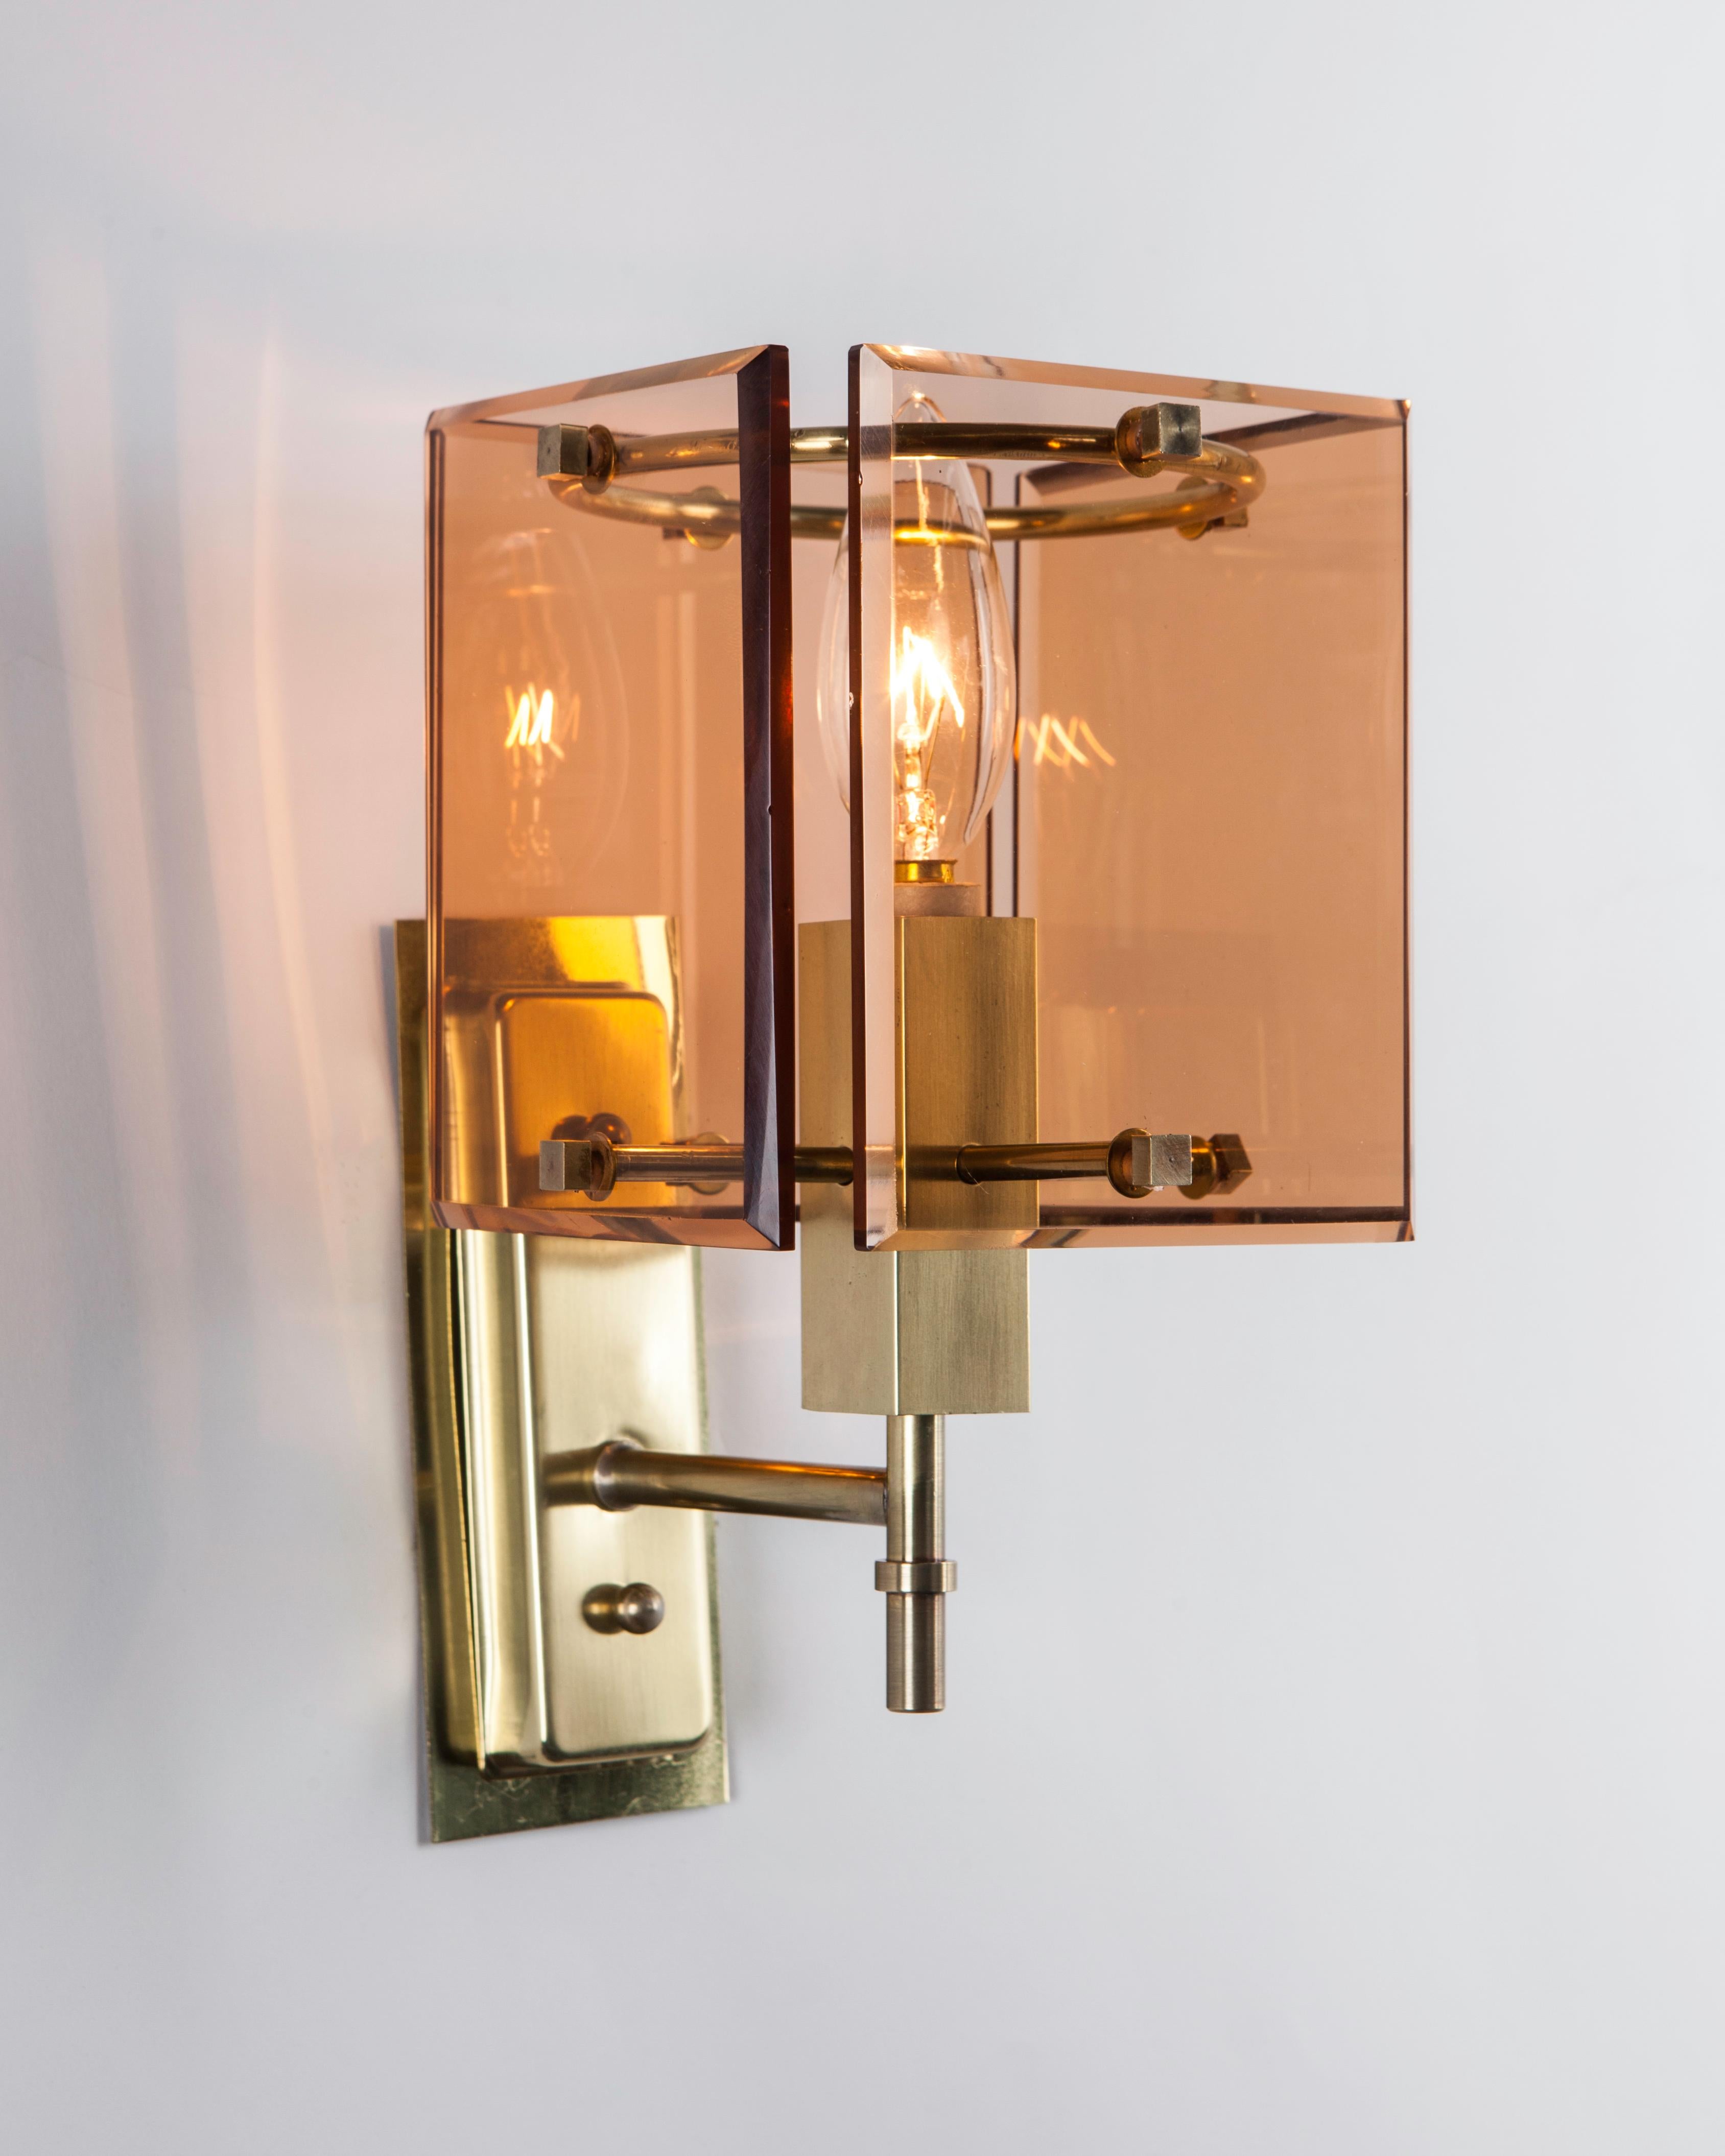 AIS3110
A pair of vintage French Deco sconces with square rose glass panel shades which create a wonderful warm glow. Small cube fasteners hold the glass onto rectangular brass frames in their original soft worn polished finish. Due to the antique